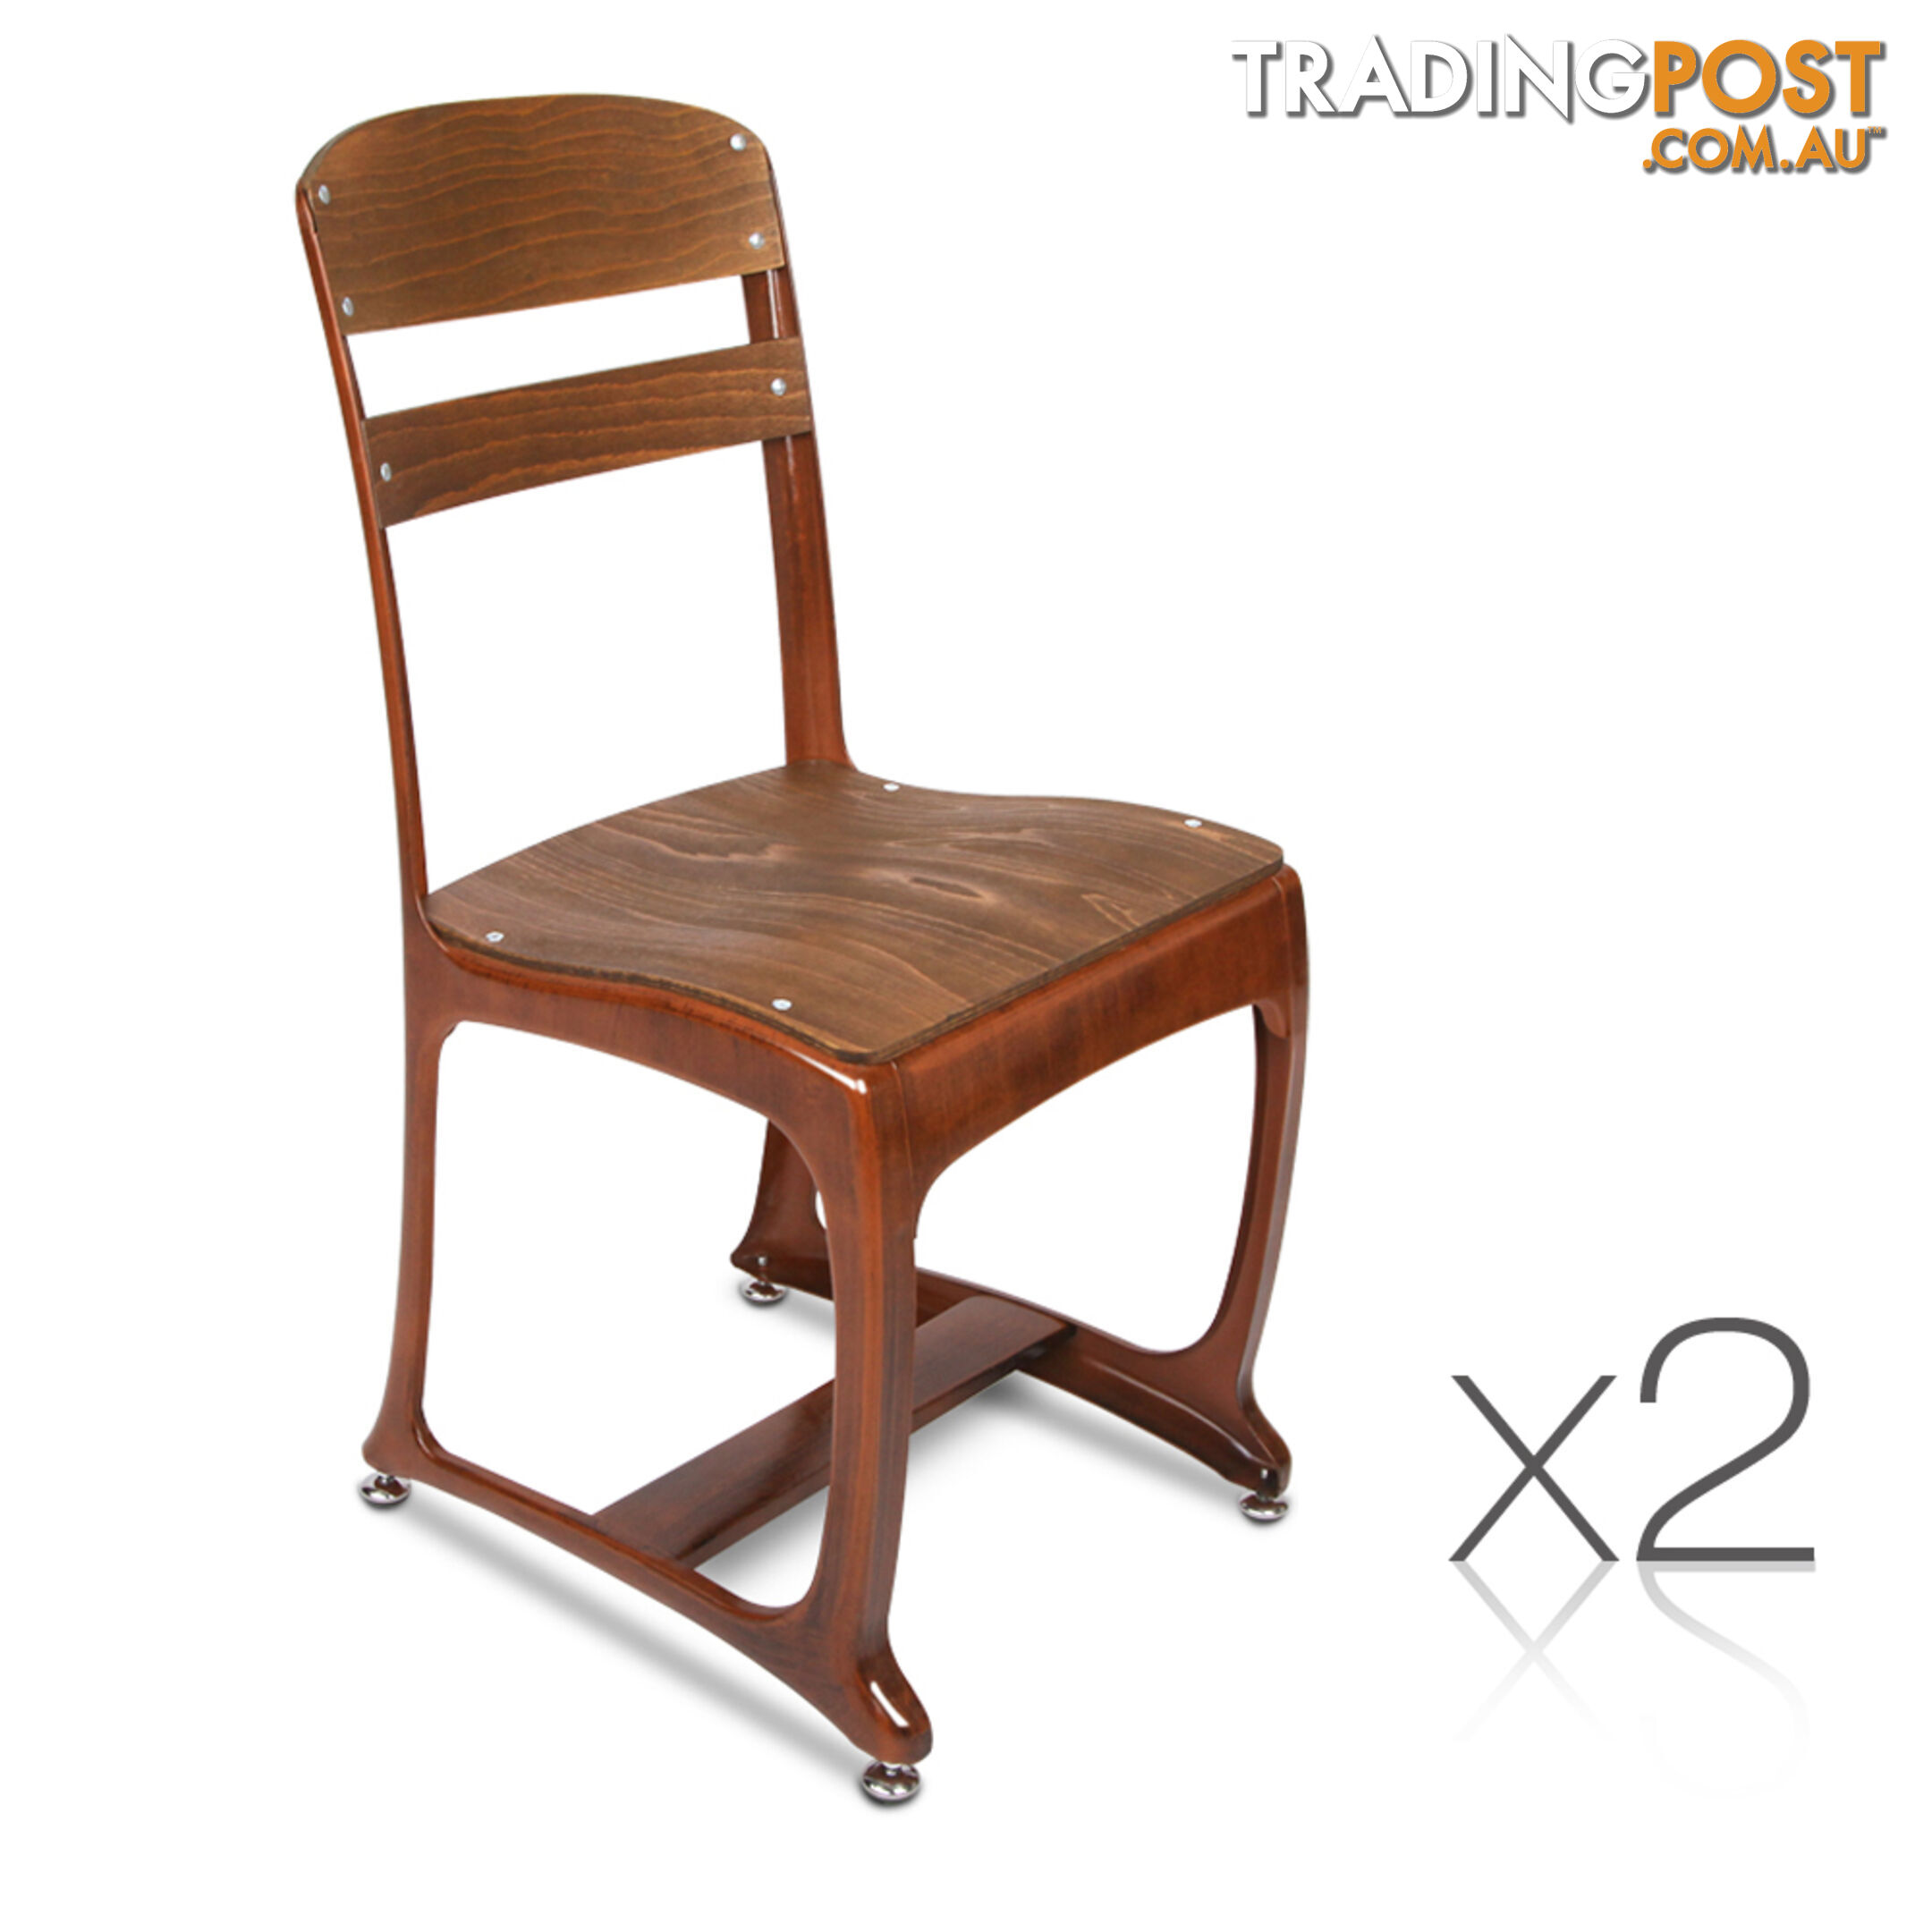 2 x Replica Eton Dining Chairs Vintage Warehouse Industrial Style Chair Copper